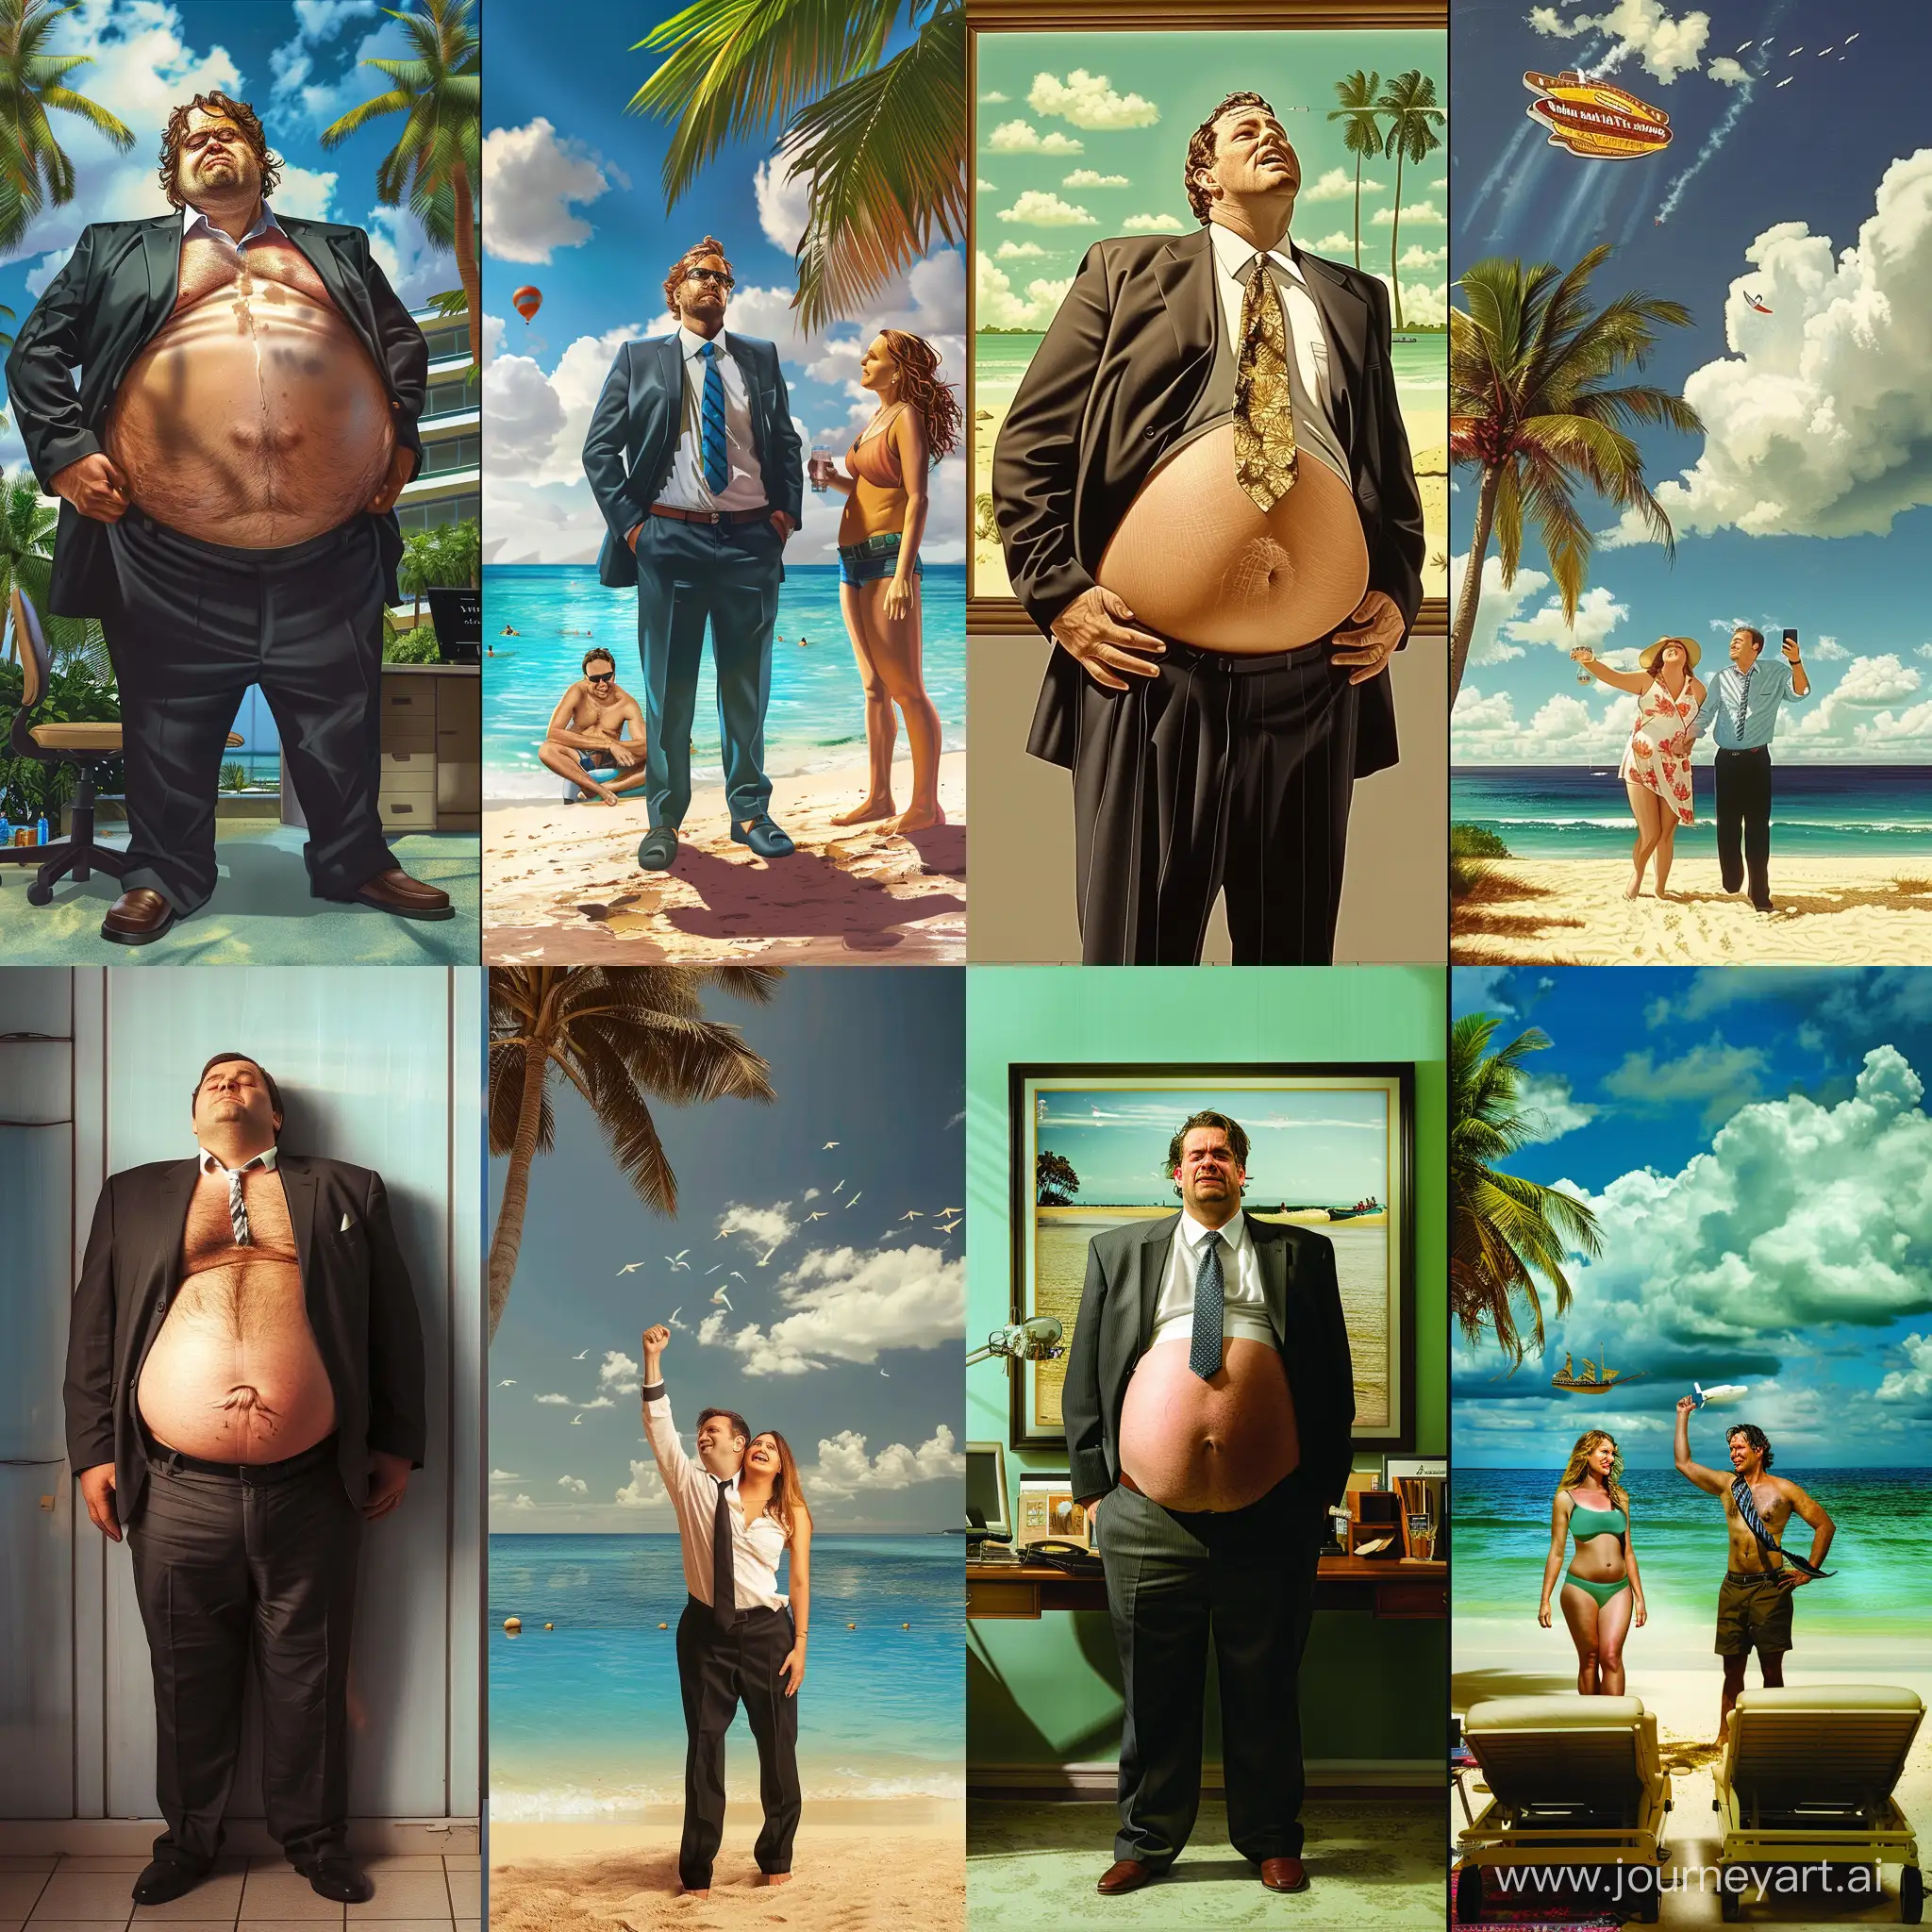 Please make a realistic picture of a guy who is fat in an office wearing a suit with his belly sticking out and his life looks dull and he is in pain versus a guy on vacation enjoying his life with his wife  and they are just having the time of their life